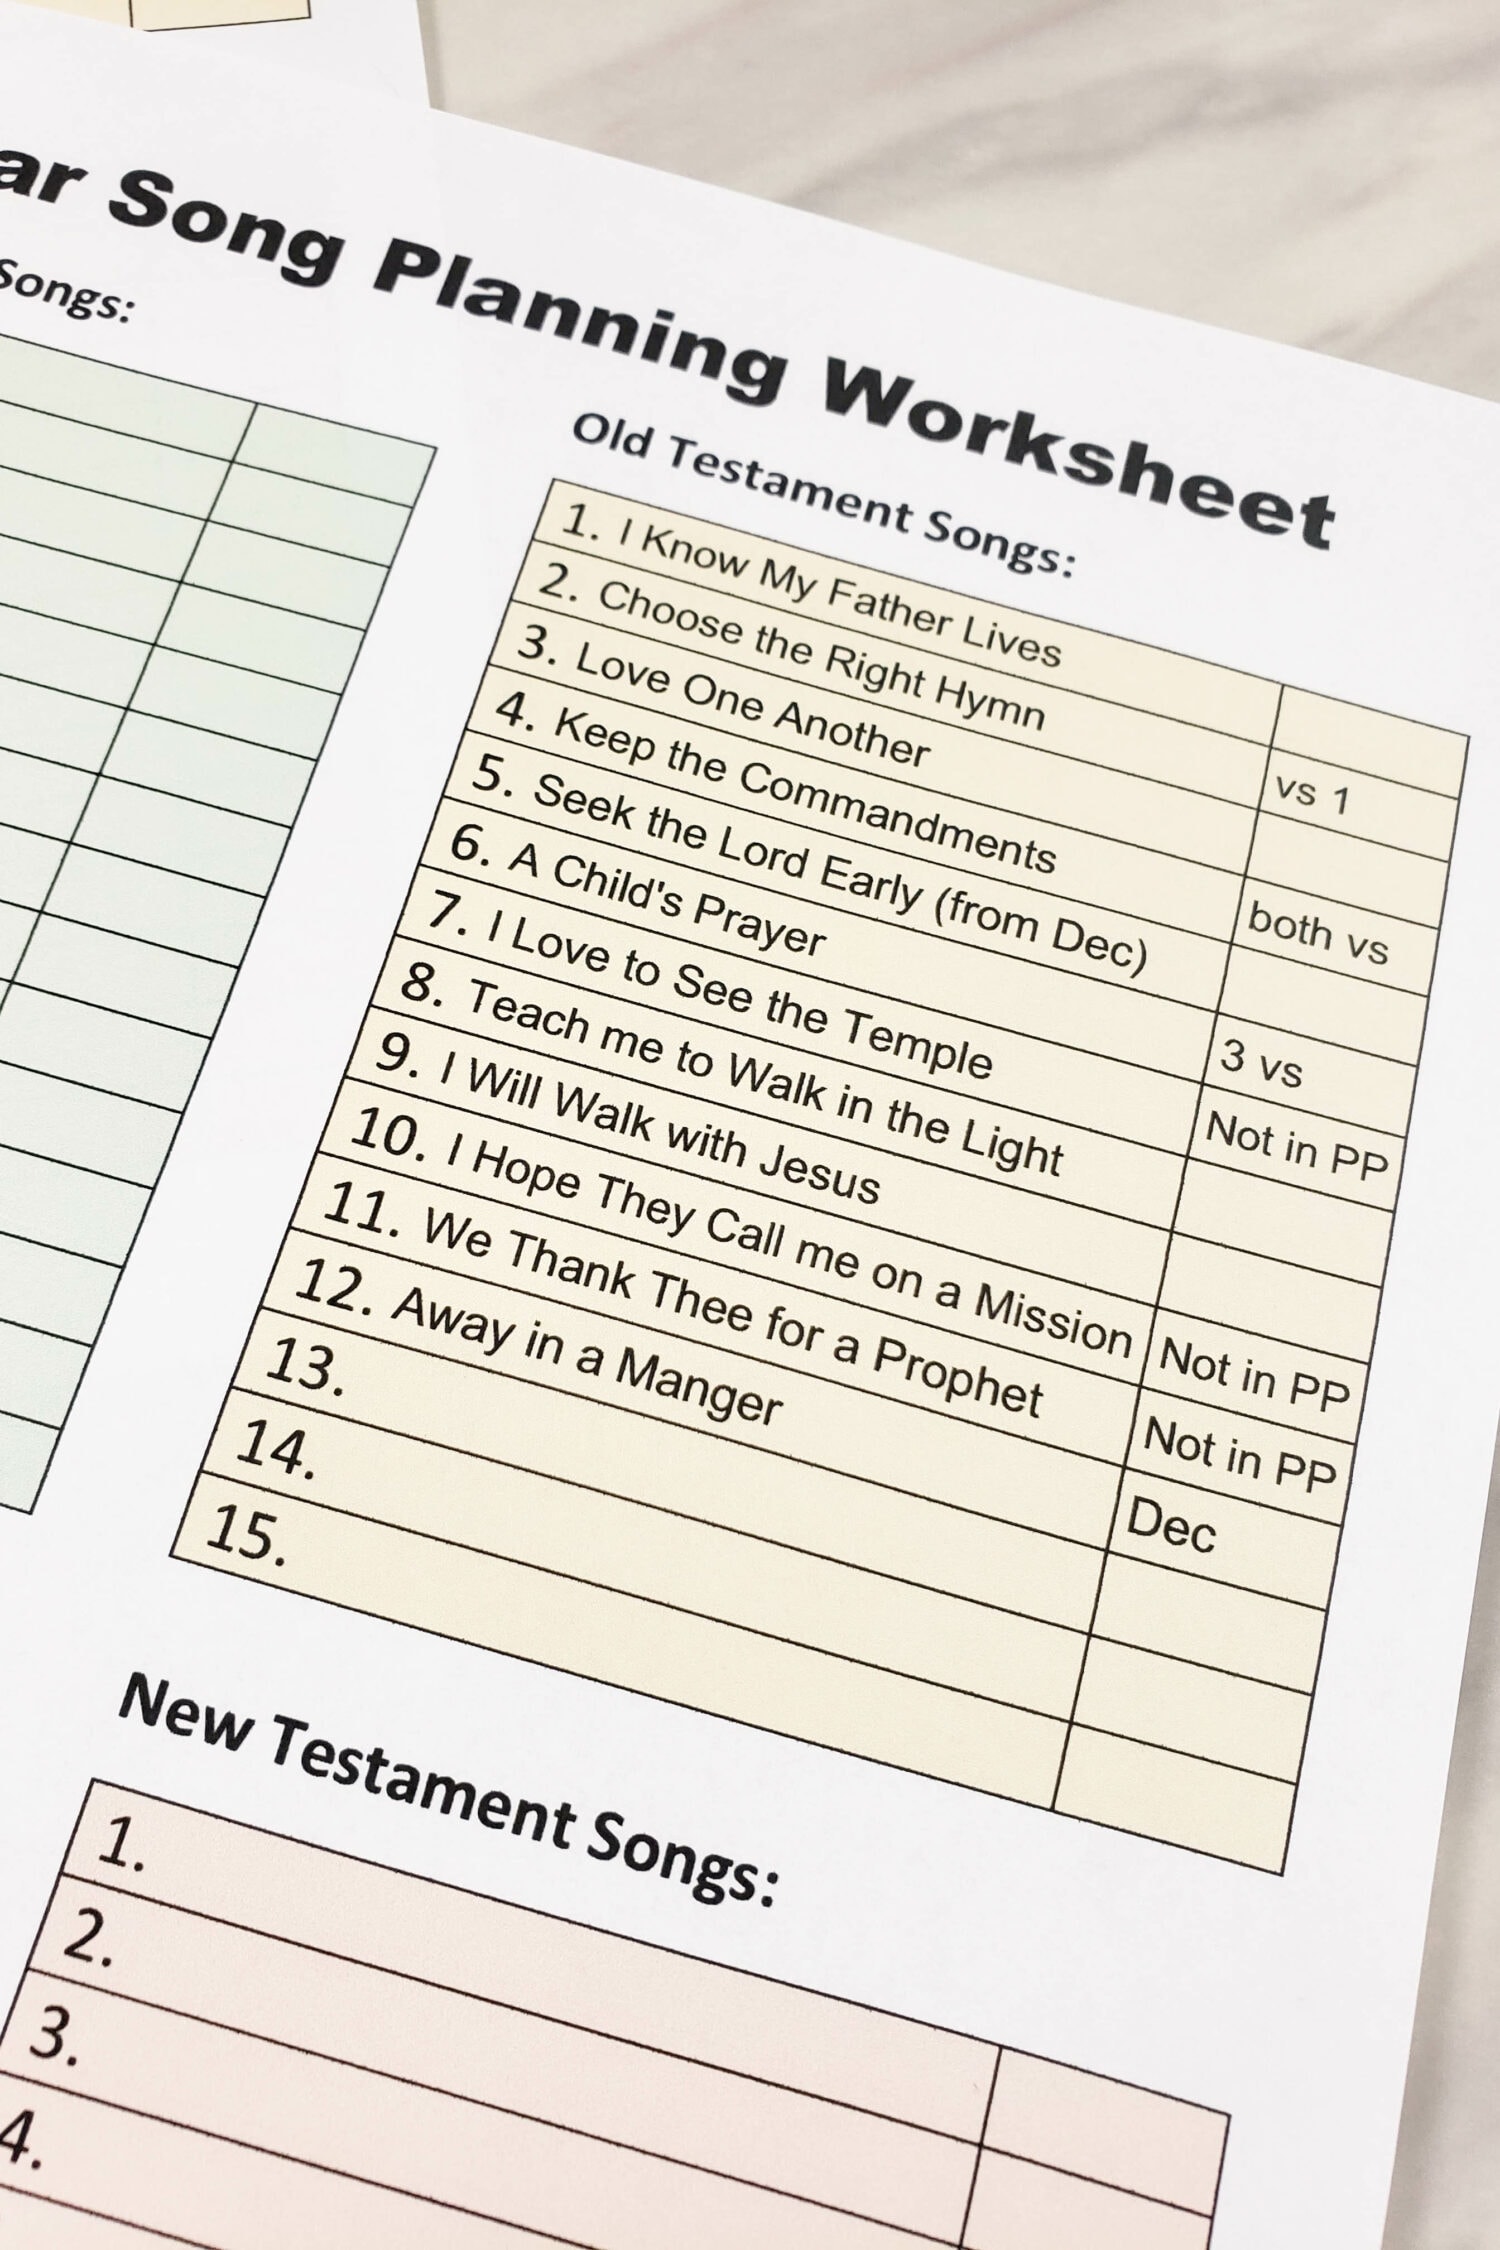 4-Year easy to track Primary Songs Planning Worksheet!! Use this printable to help you track songs you've taught and songs you are planning to teach in future years to keep good records of what songs the kids know and what to teach next during Singing Time! A printable resource for LDS Primary music leaders.